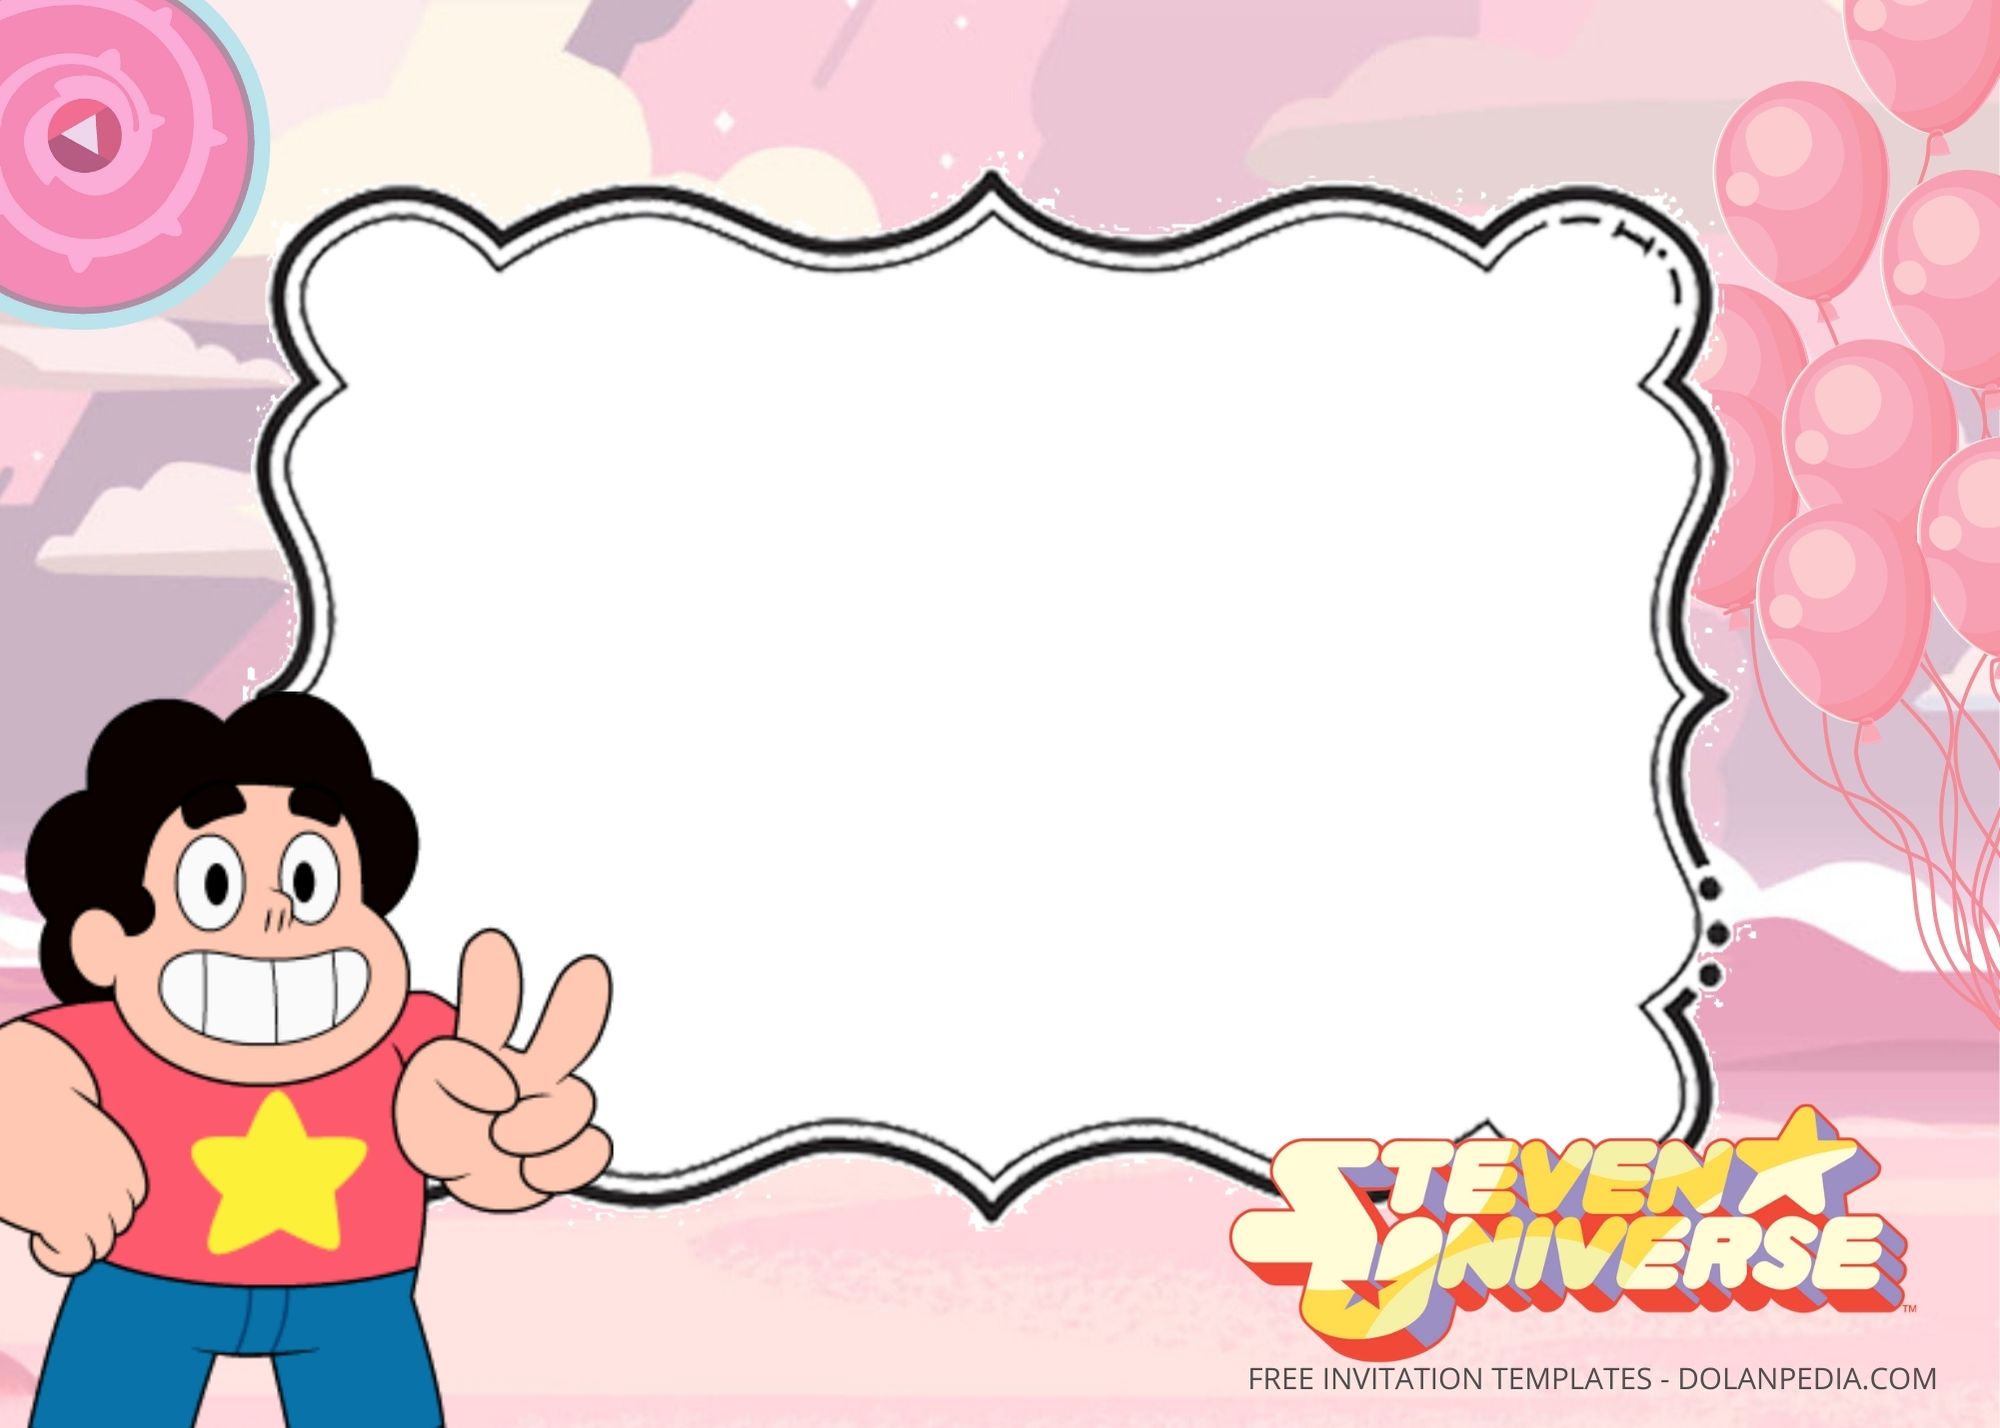 Blank Steven Universe Birthday Party Templates FIve